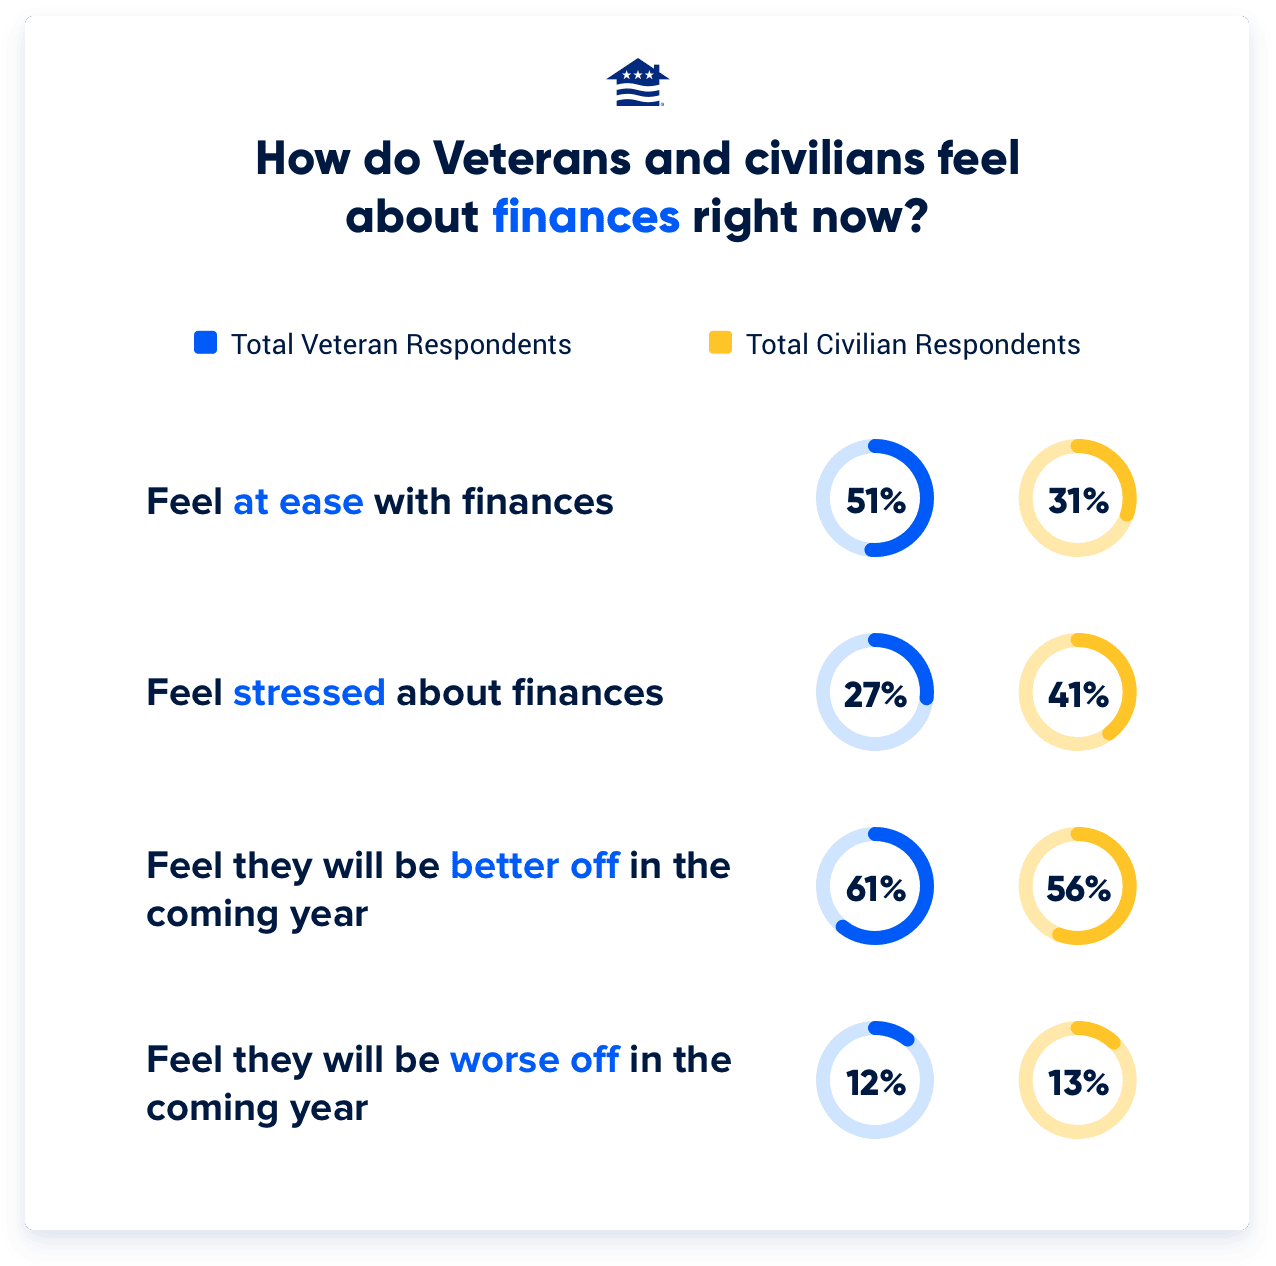 Compared to civilians, Veterans are more at ease with finances, more optimistic about their financial future, and less stressed about their finances.